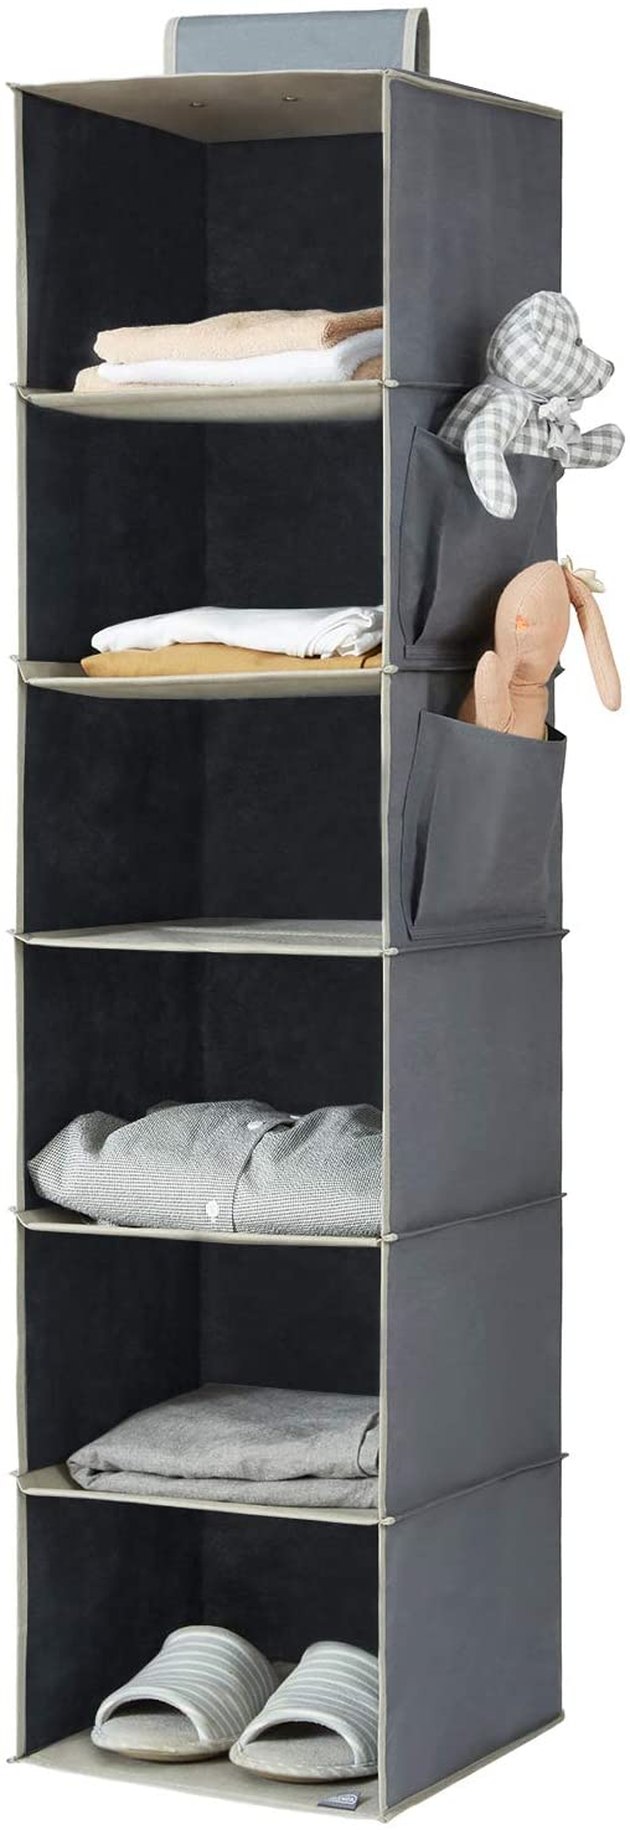 Declutter your closet and keep your clothes in good shape with this hanging closet organizer. It comes with six shelves spacious enough for bulky sweaters or jeans.